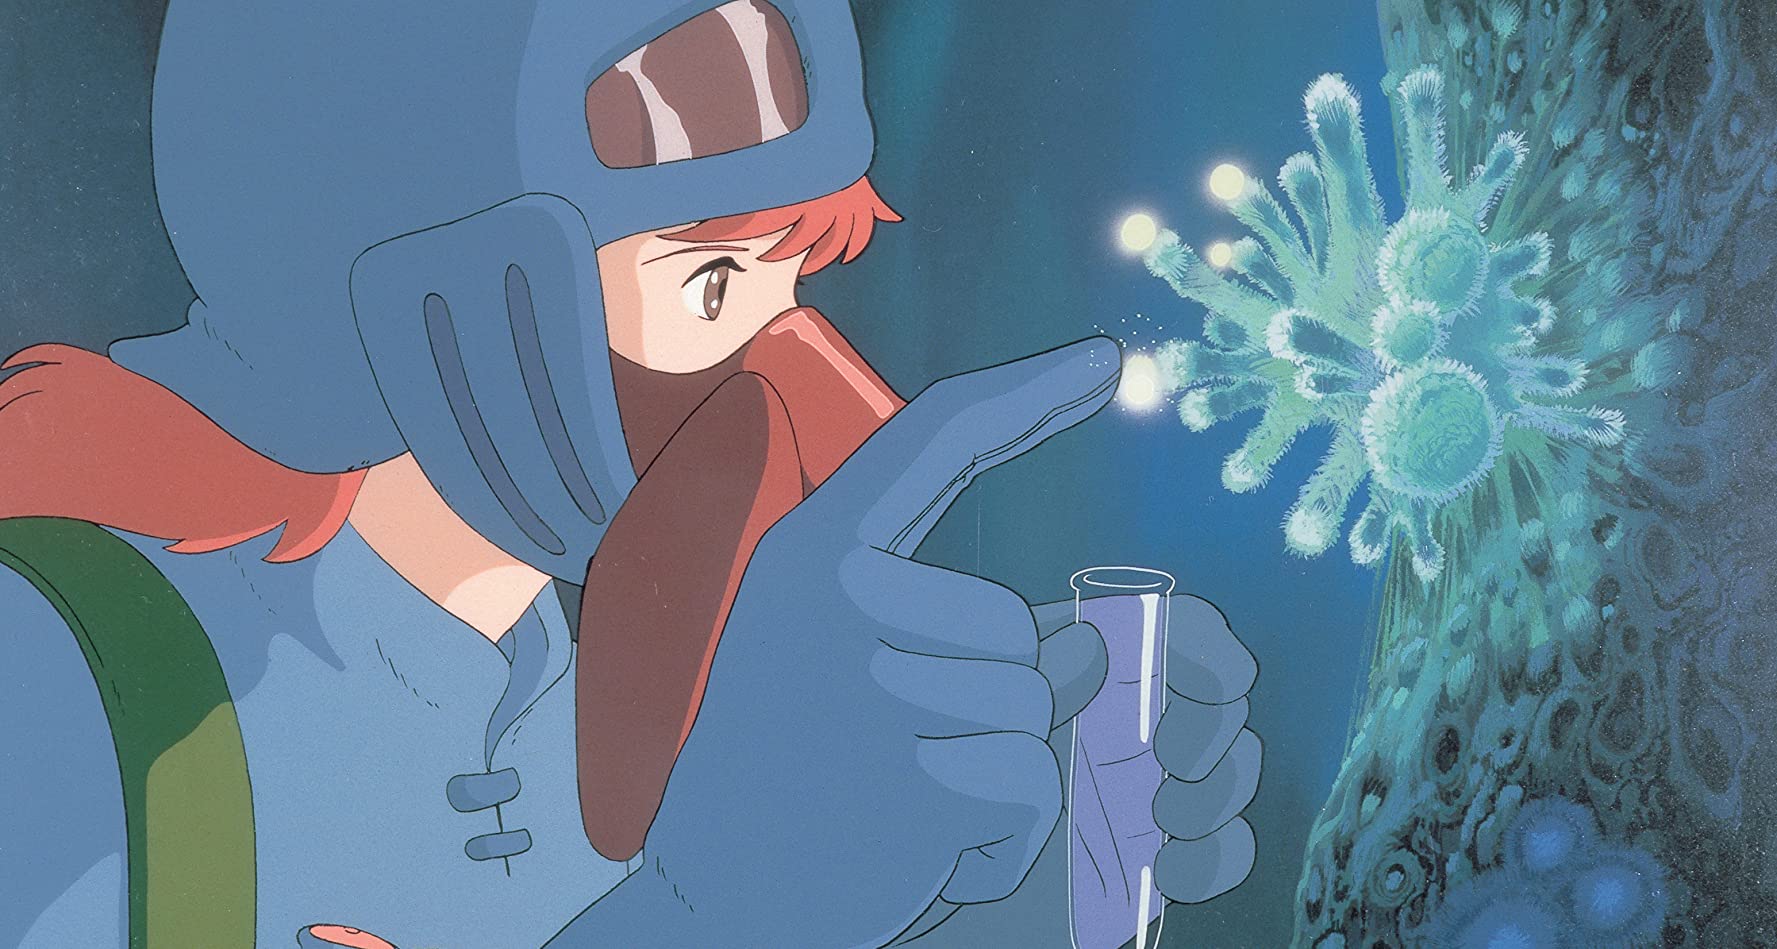 Nausicaa from the film Nausicaa of the Valley of the Wind harvests a glowing spore from the Toxic Jungle. 